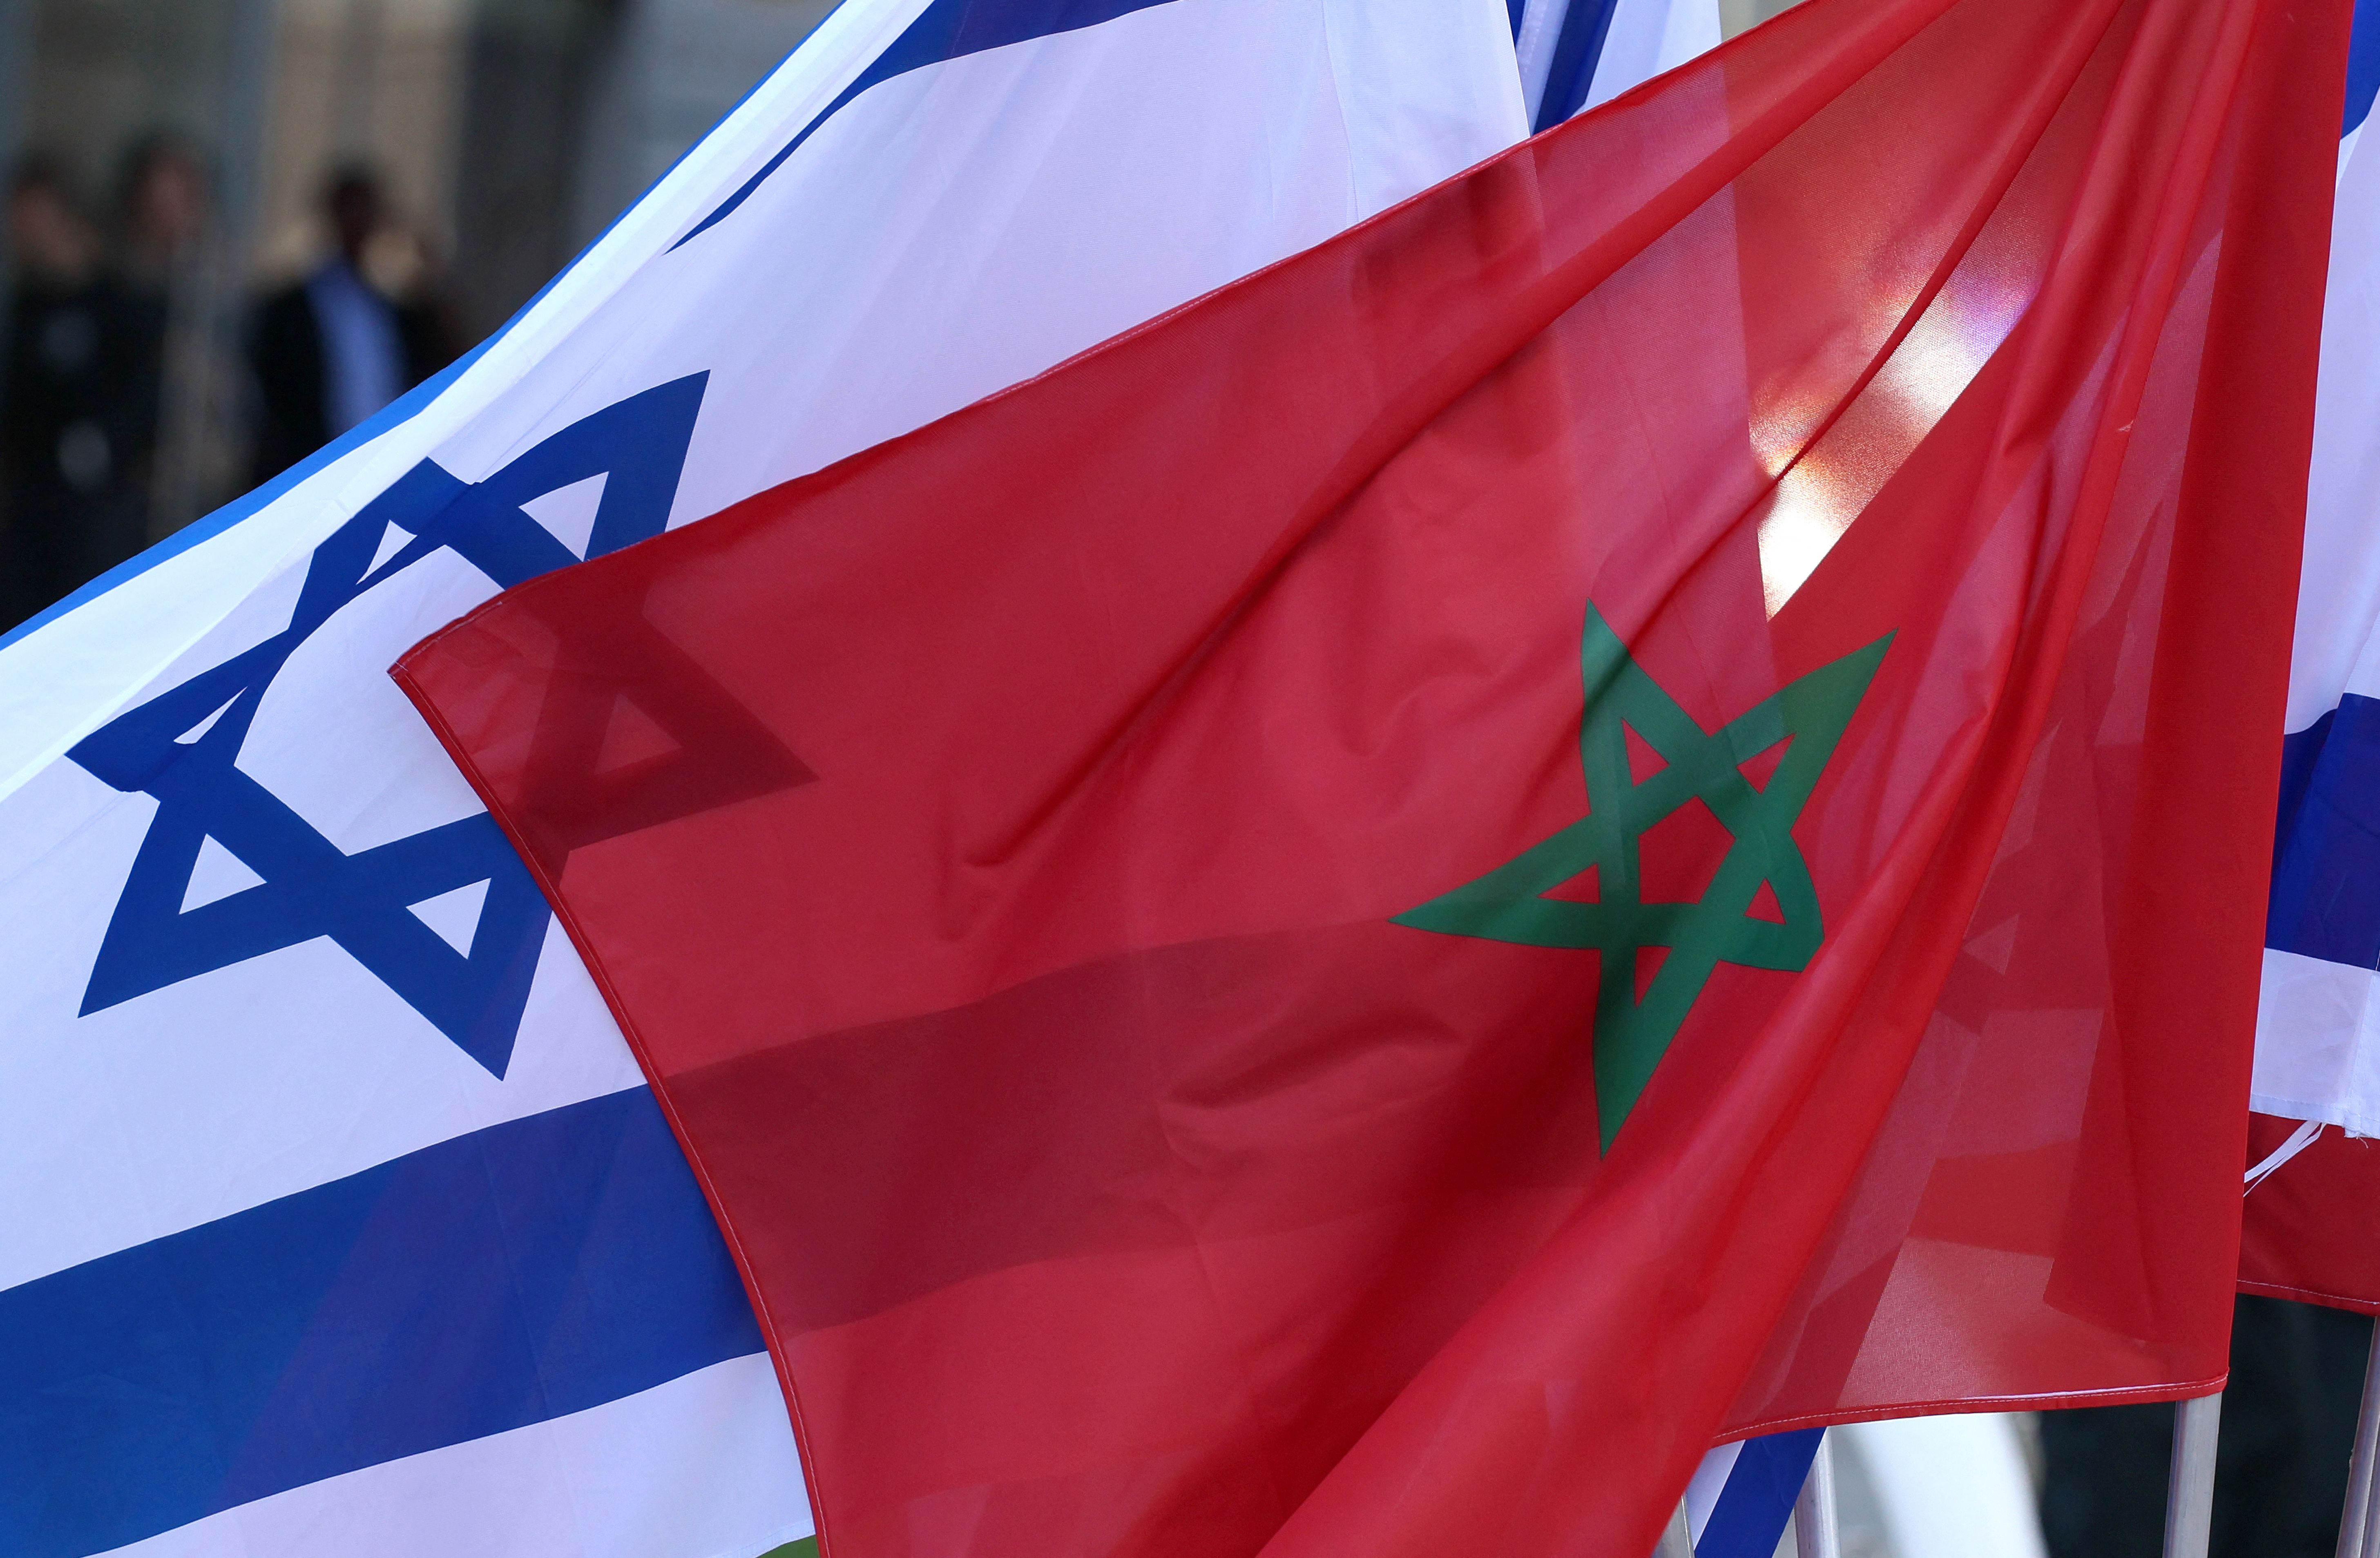 Morocco and Israel: Economic Opportunities, Military Incentives, and Moral Hazards - Middle East Institute